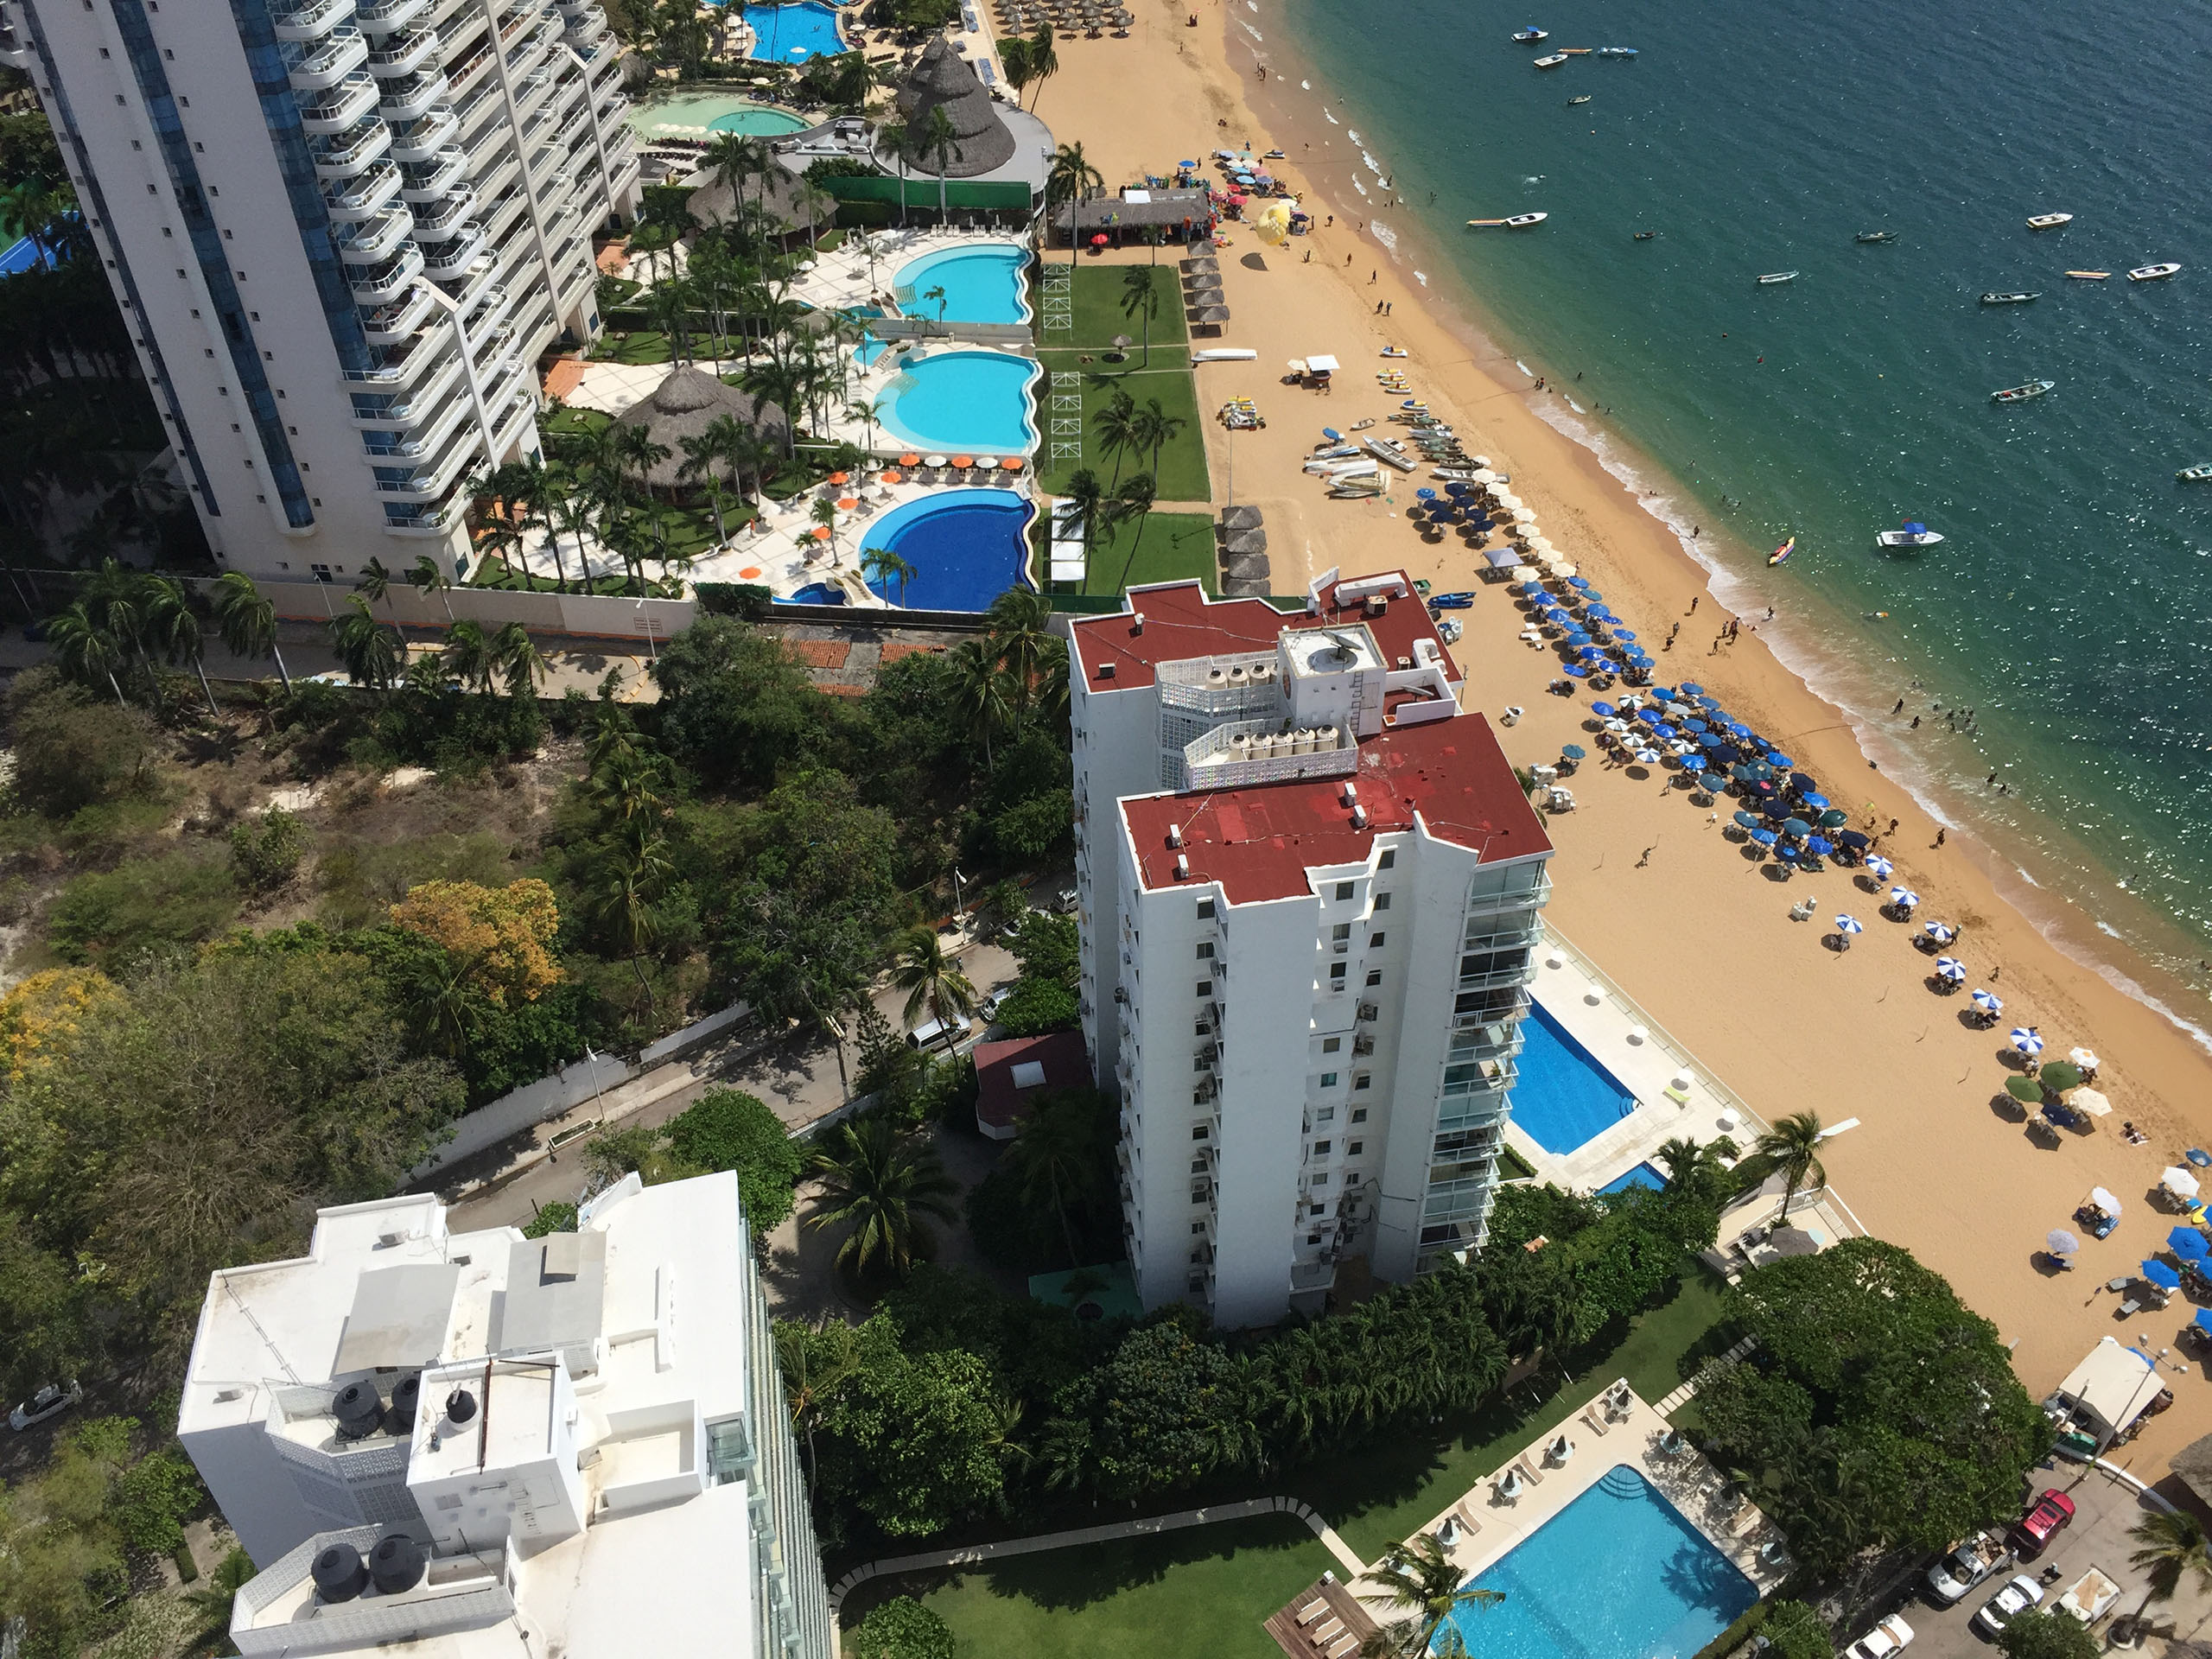 View from 30th floor of La Palapa Acapulco